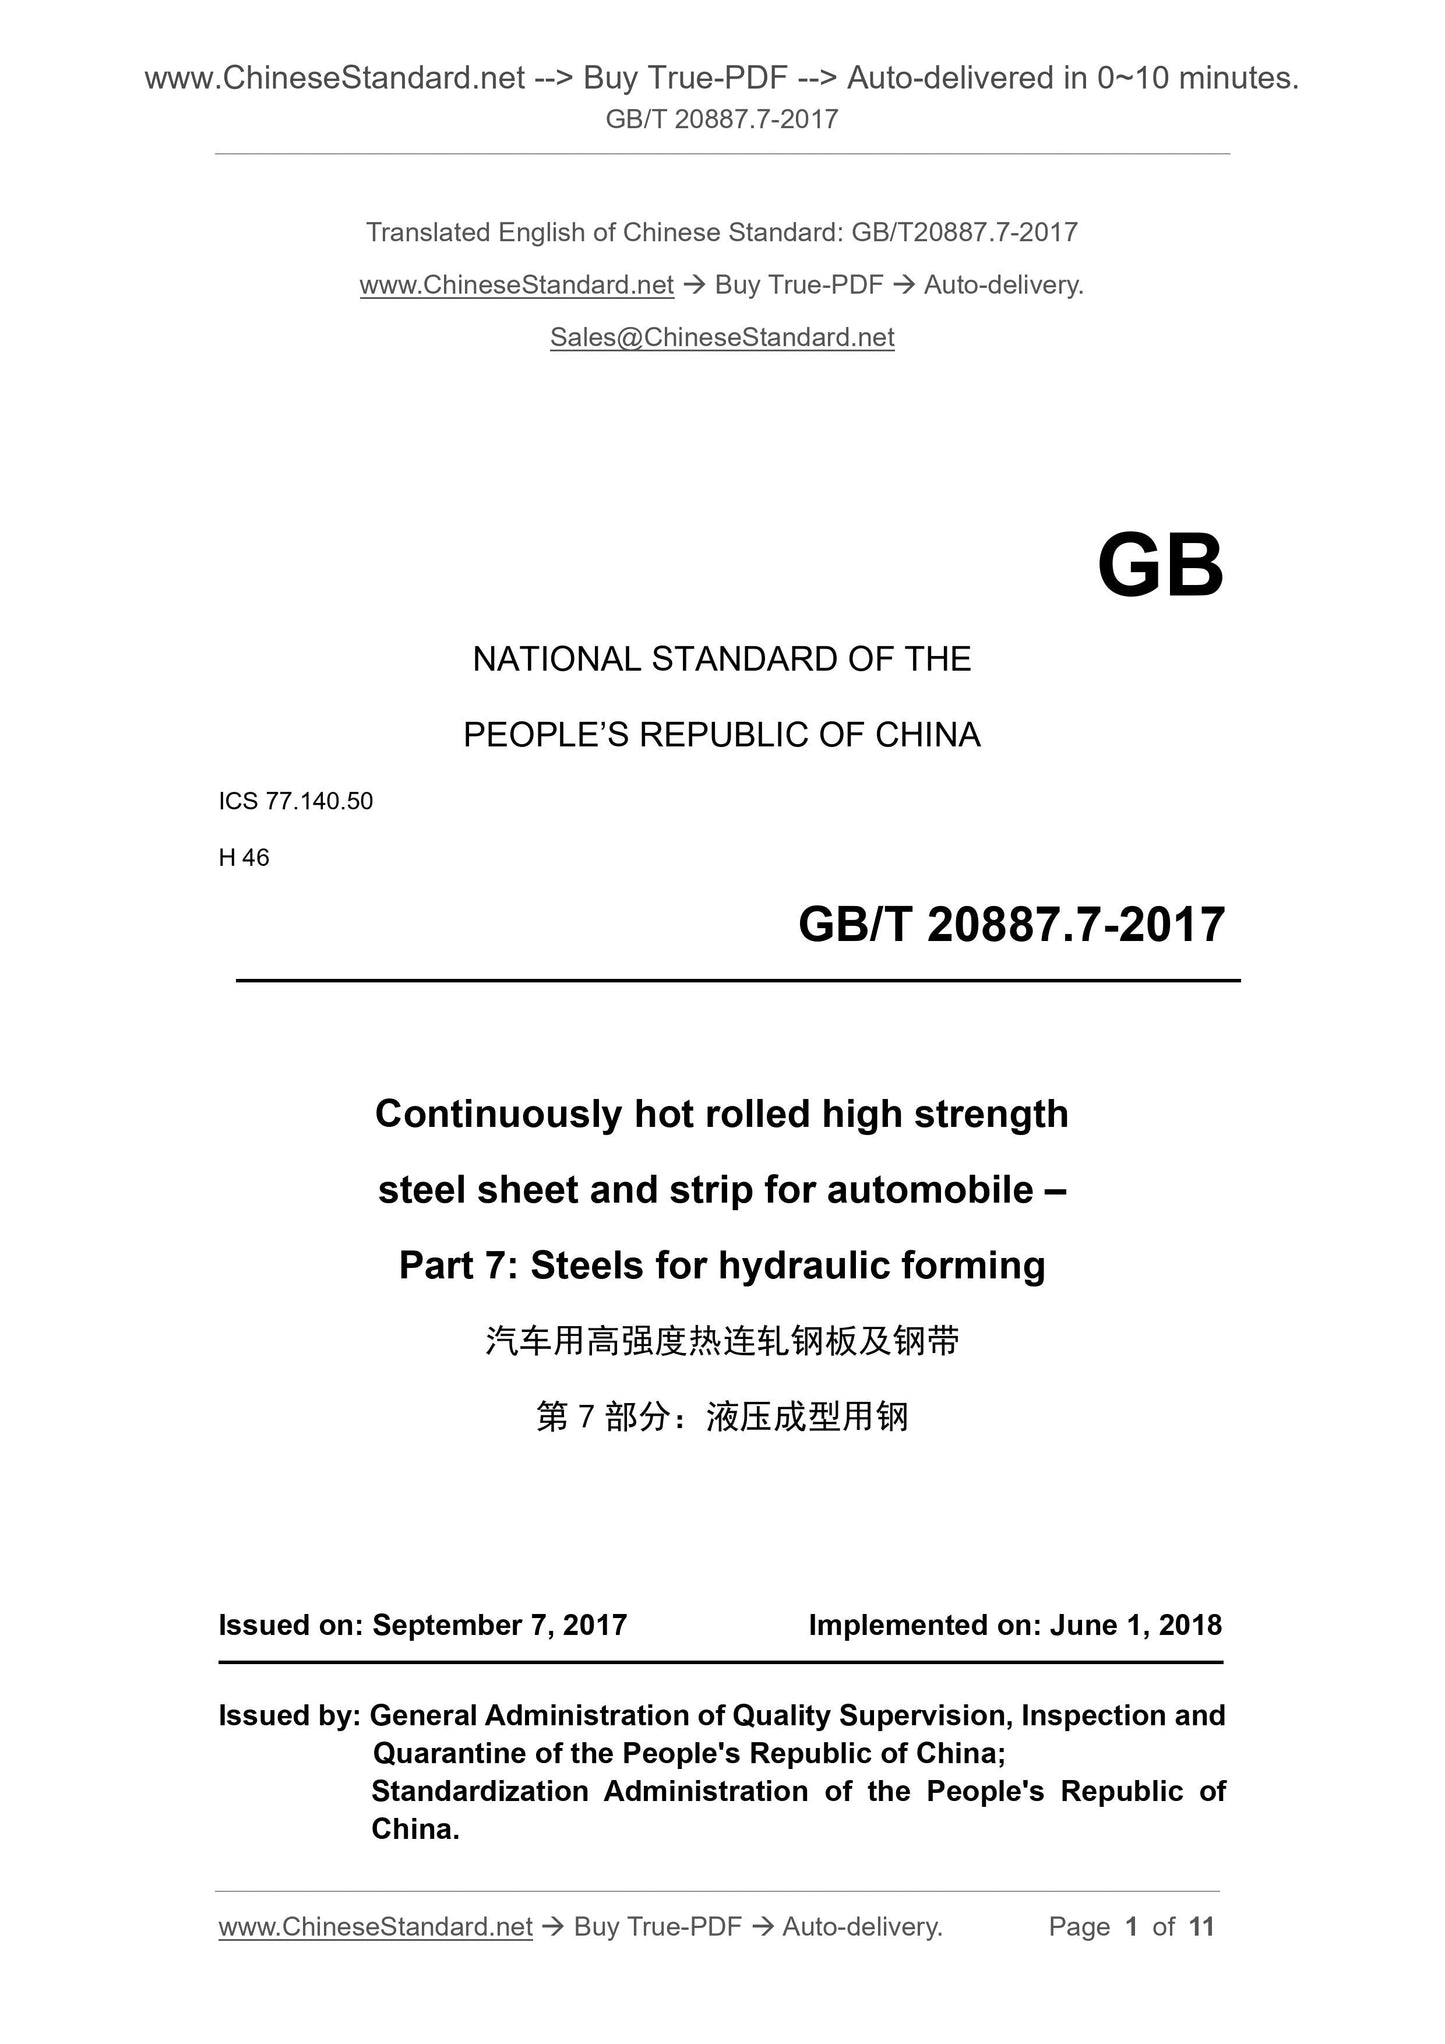 GB/T 20887.7-2017 Page 1